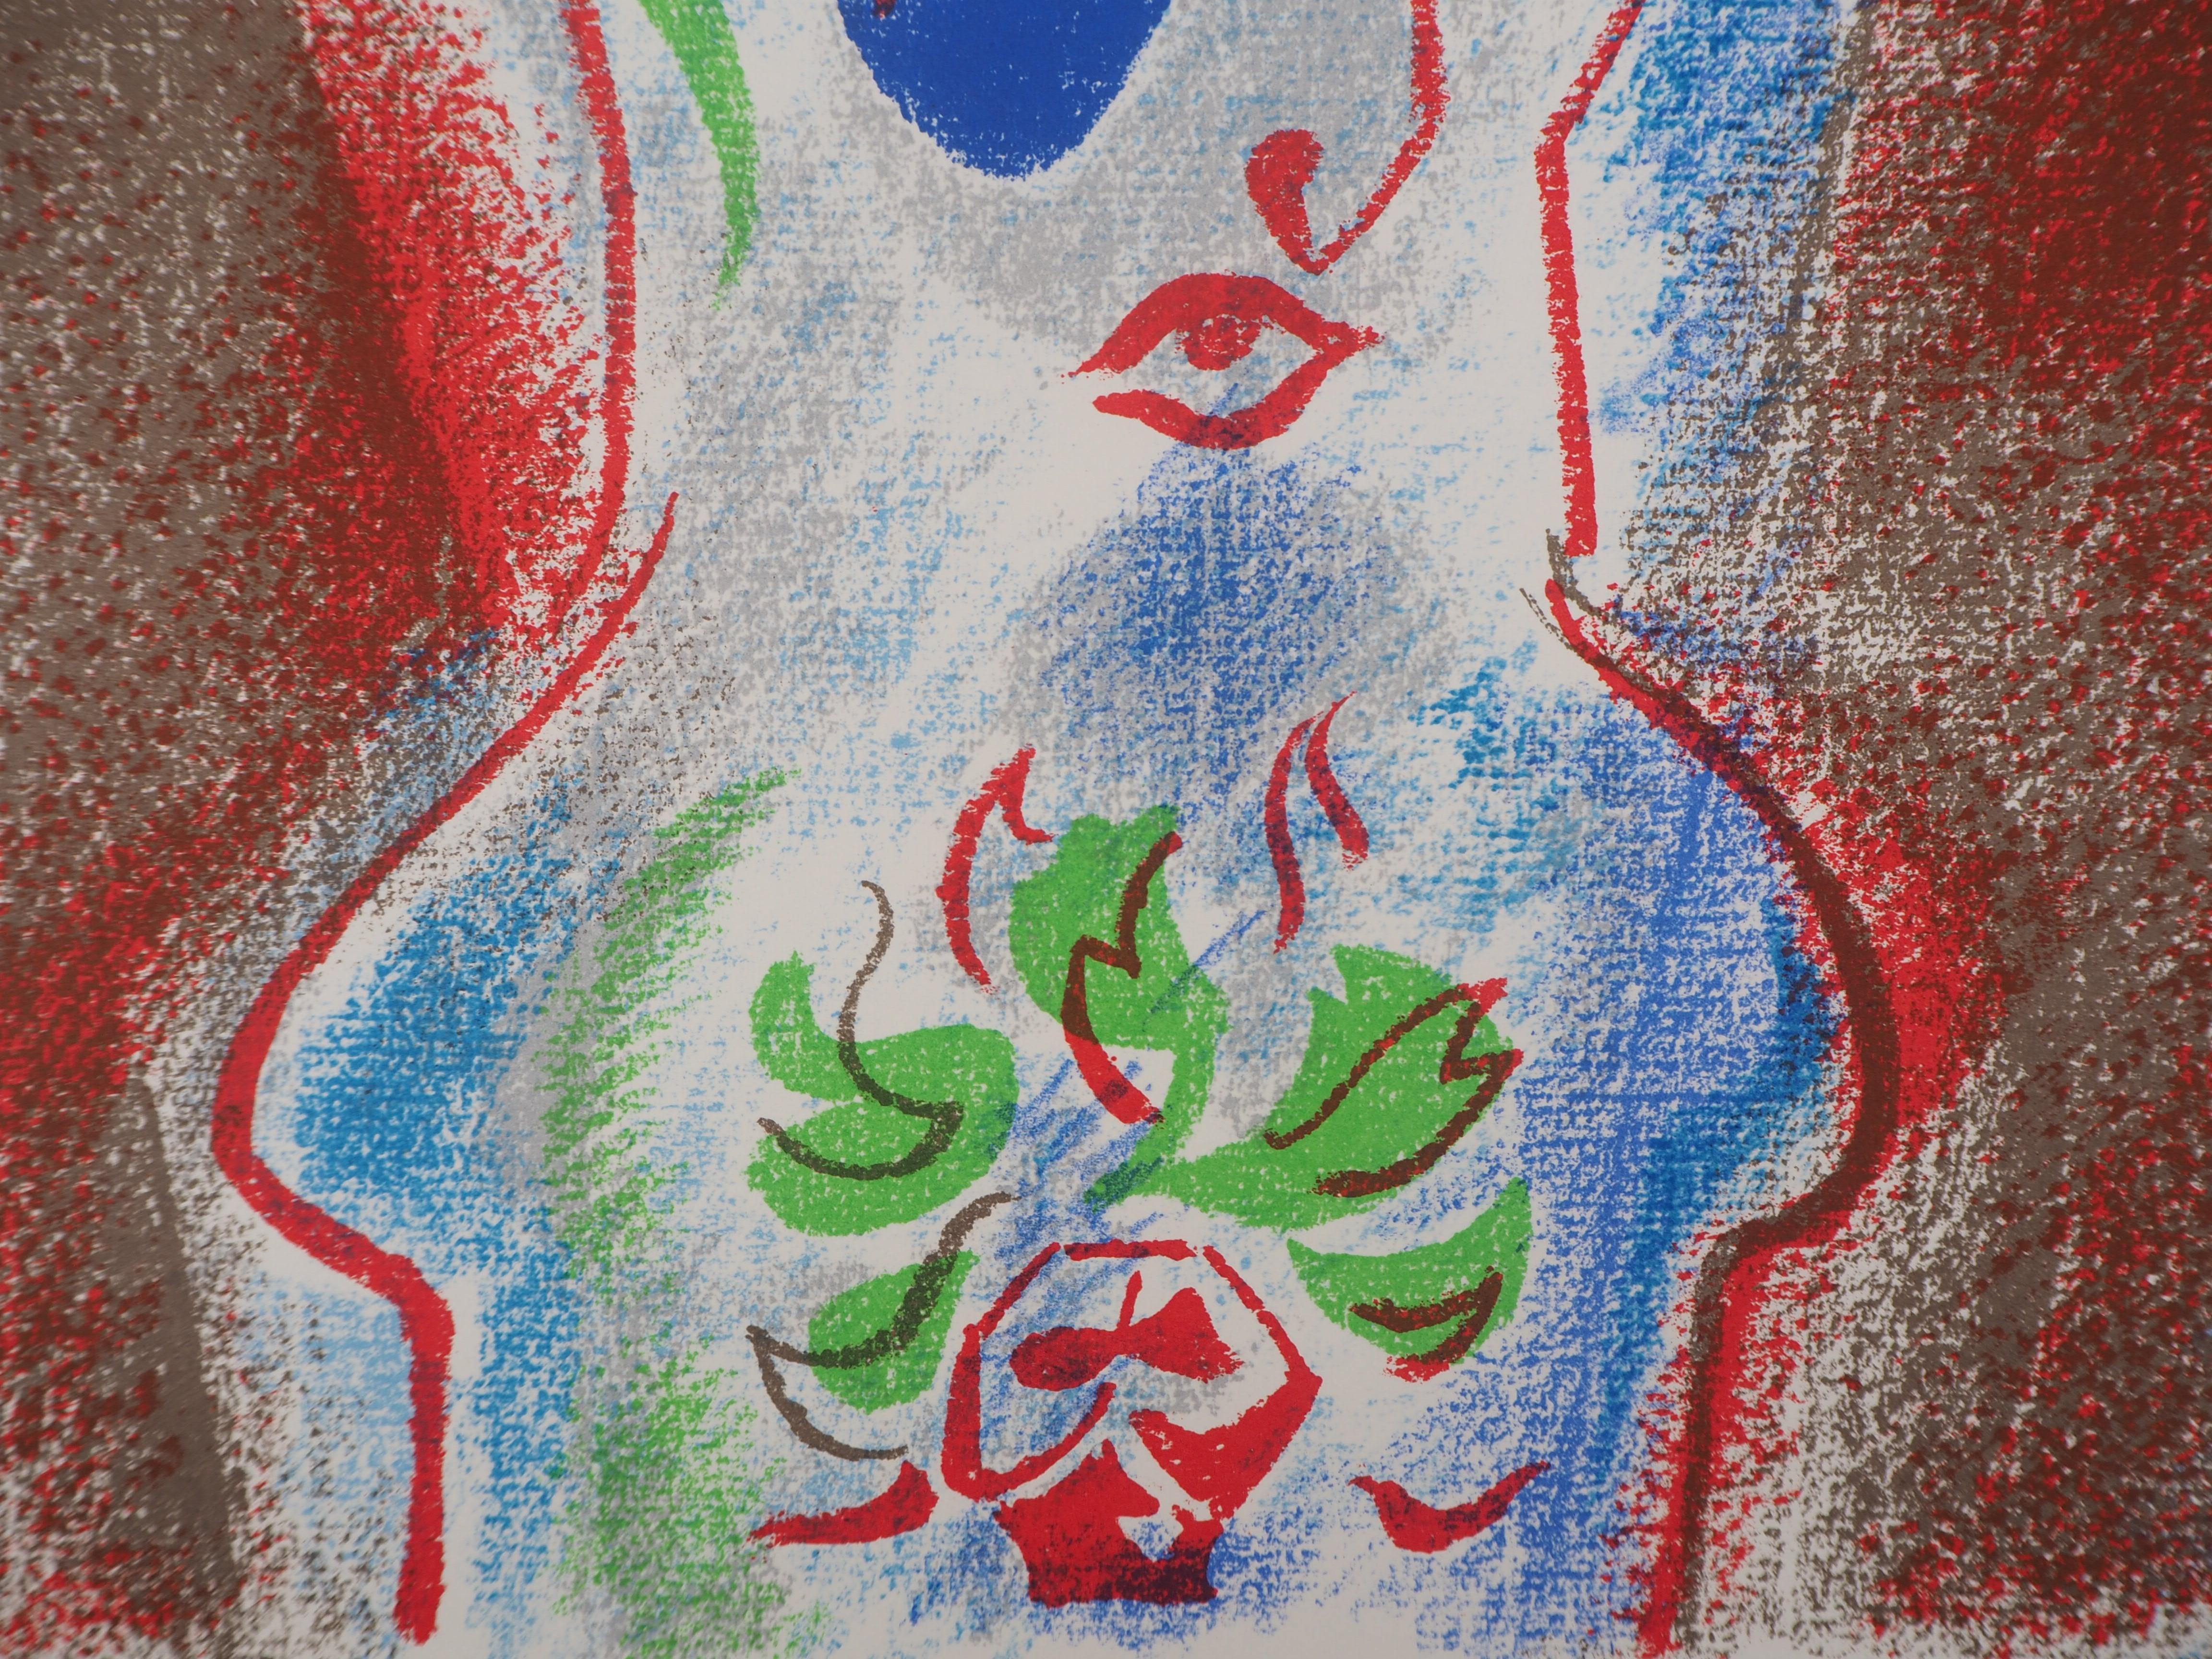 André Masson
Cupid, the God of Desire, 1972

Original Lithograph
Printed in Mourlot workshop
On vellum 31 x 24 cm (c. 12,2 x 9,5 in)

Edited by San Lazzaro in 1972

Very good condition, beautiful colors